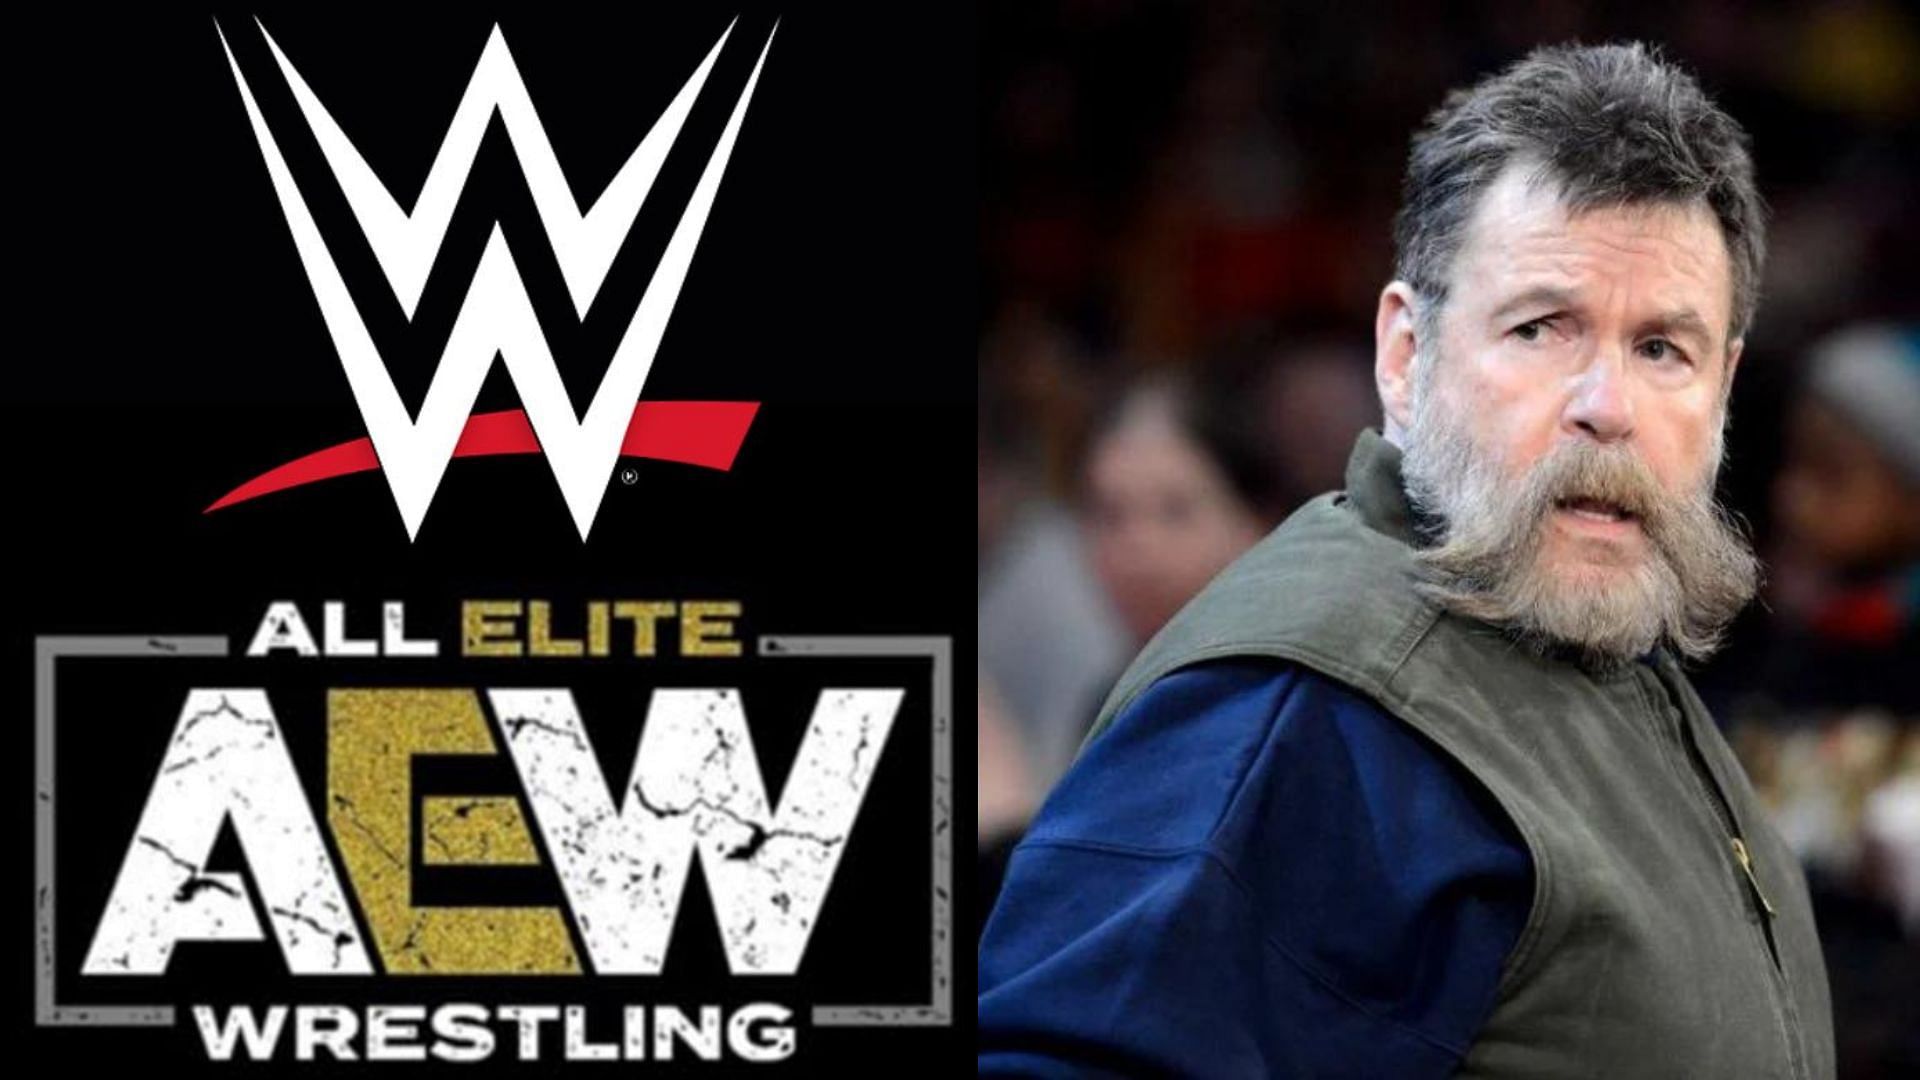 According to Dutch Mantell, which WWE Hall of Famer did AEW needed?